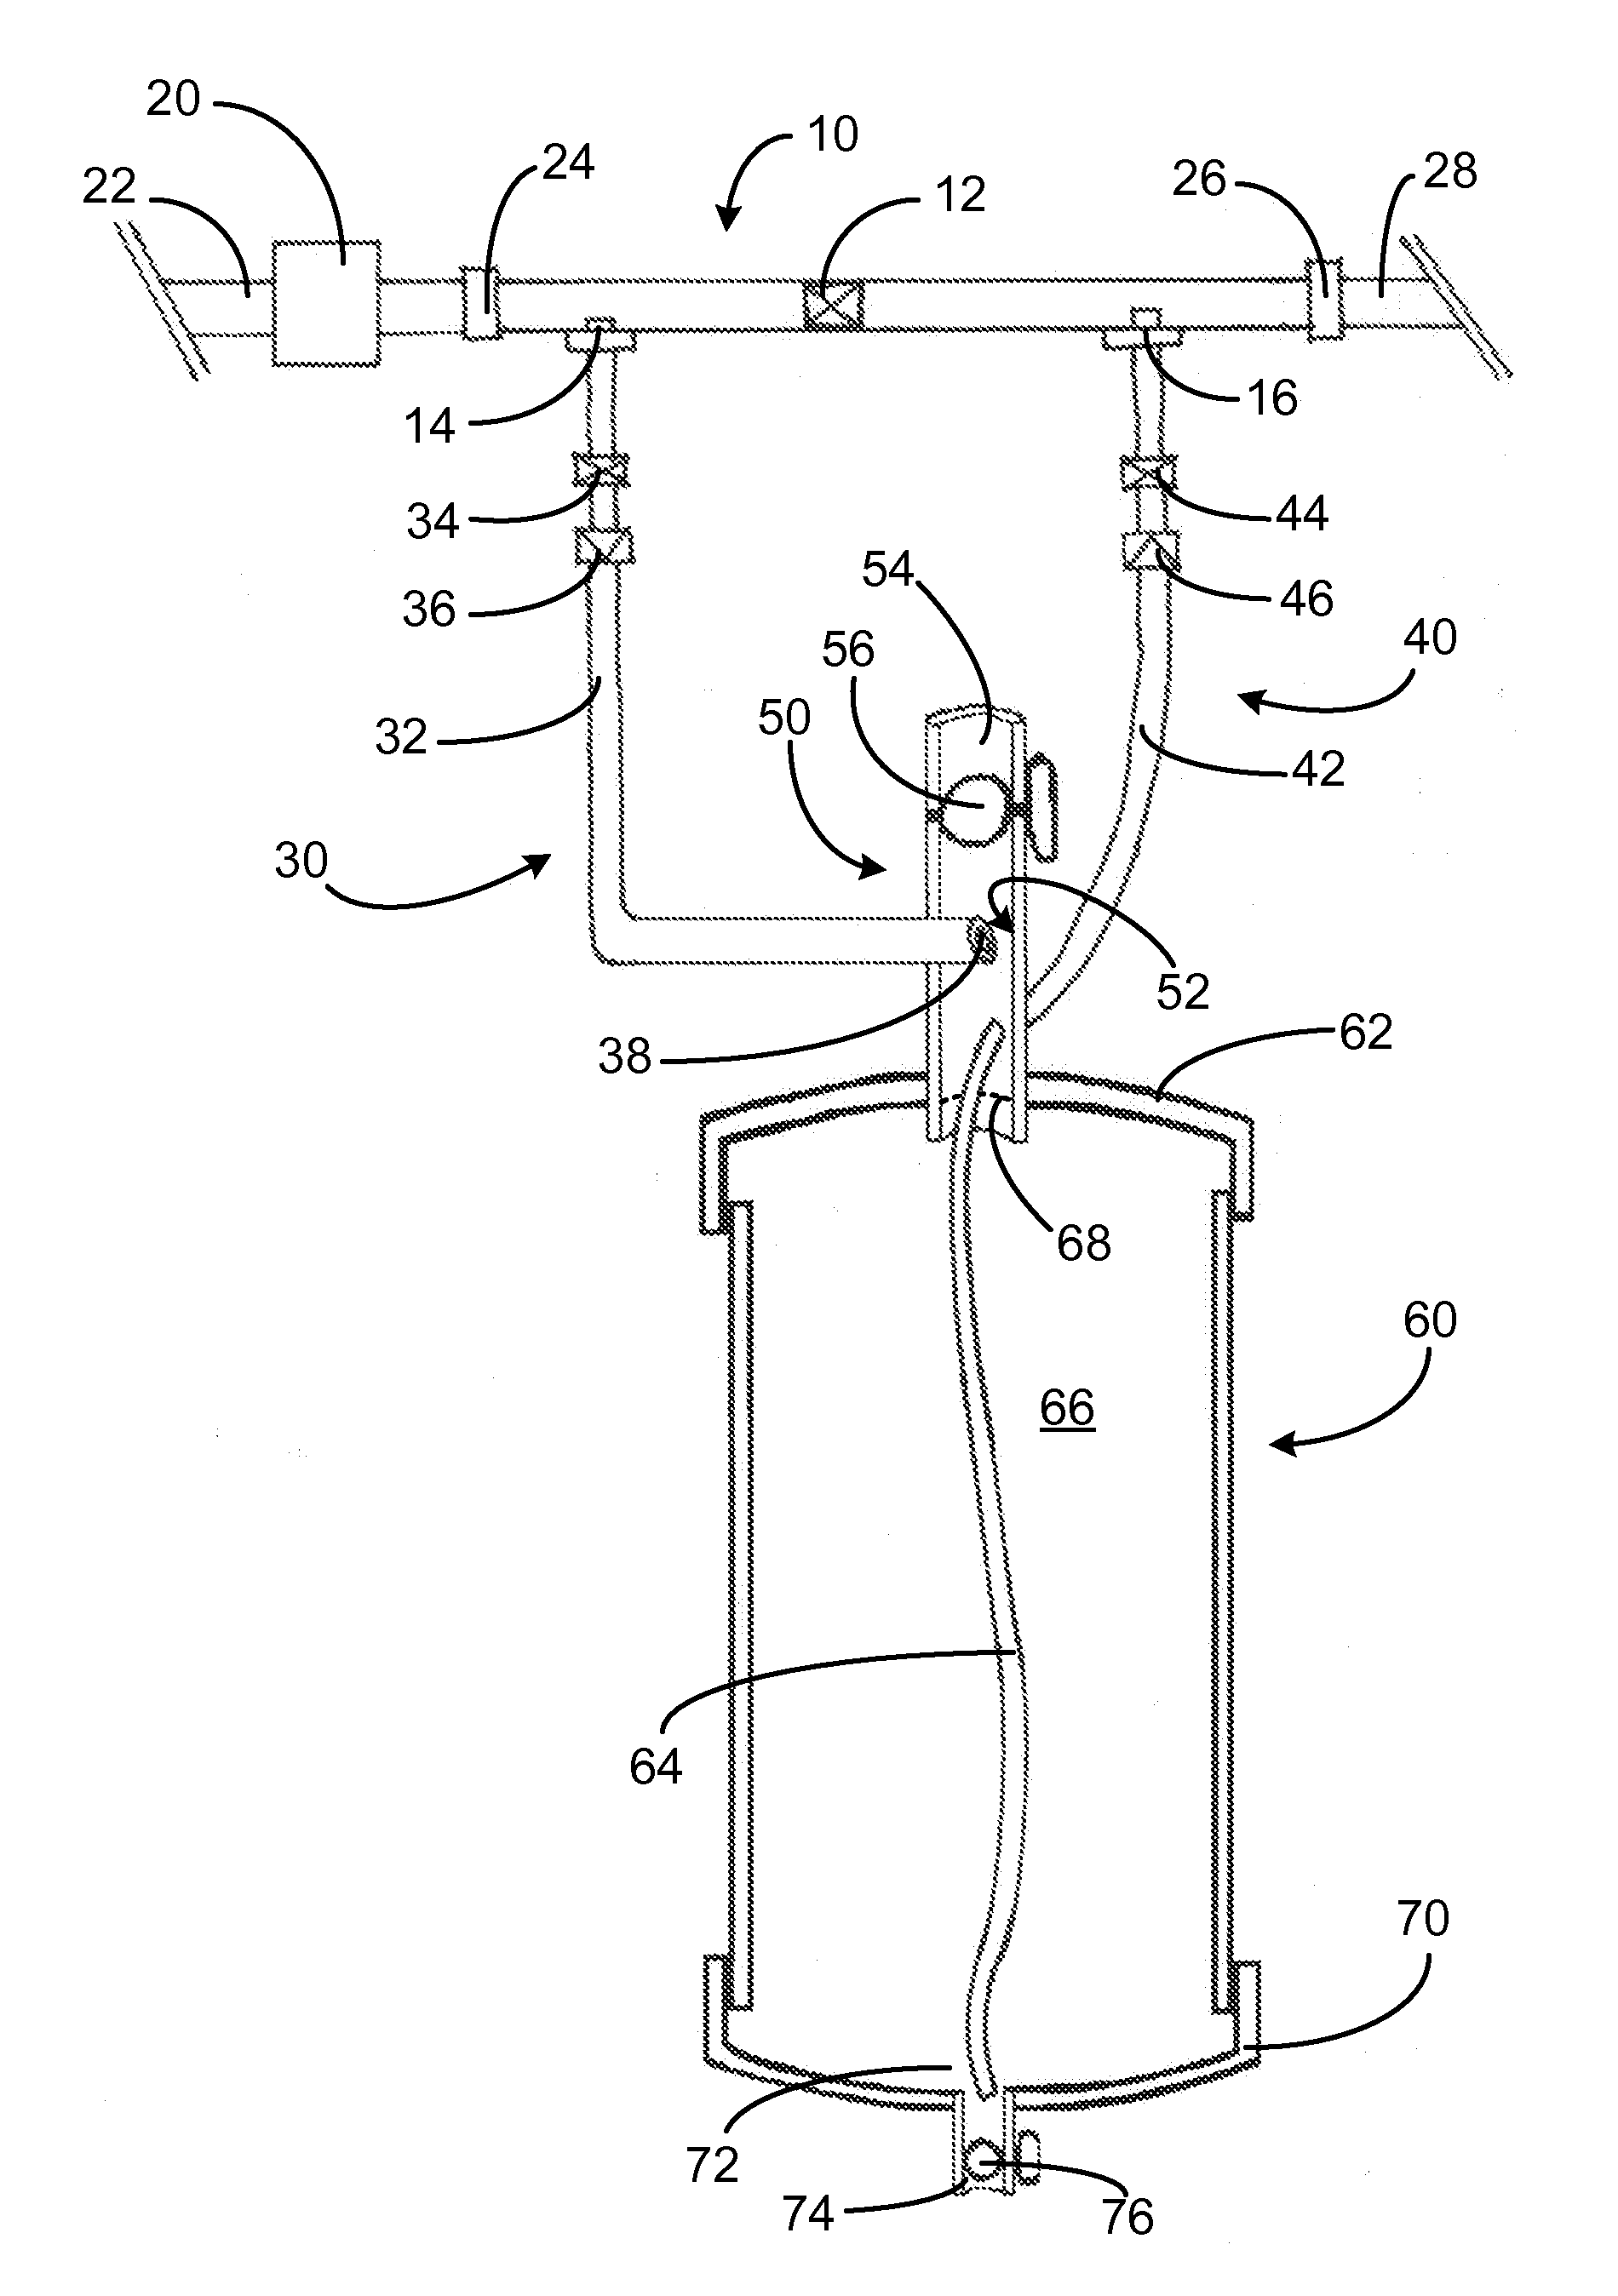 Fluid Displacement Regulated Line Feed System